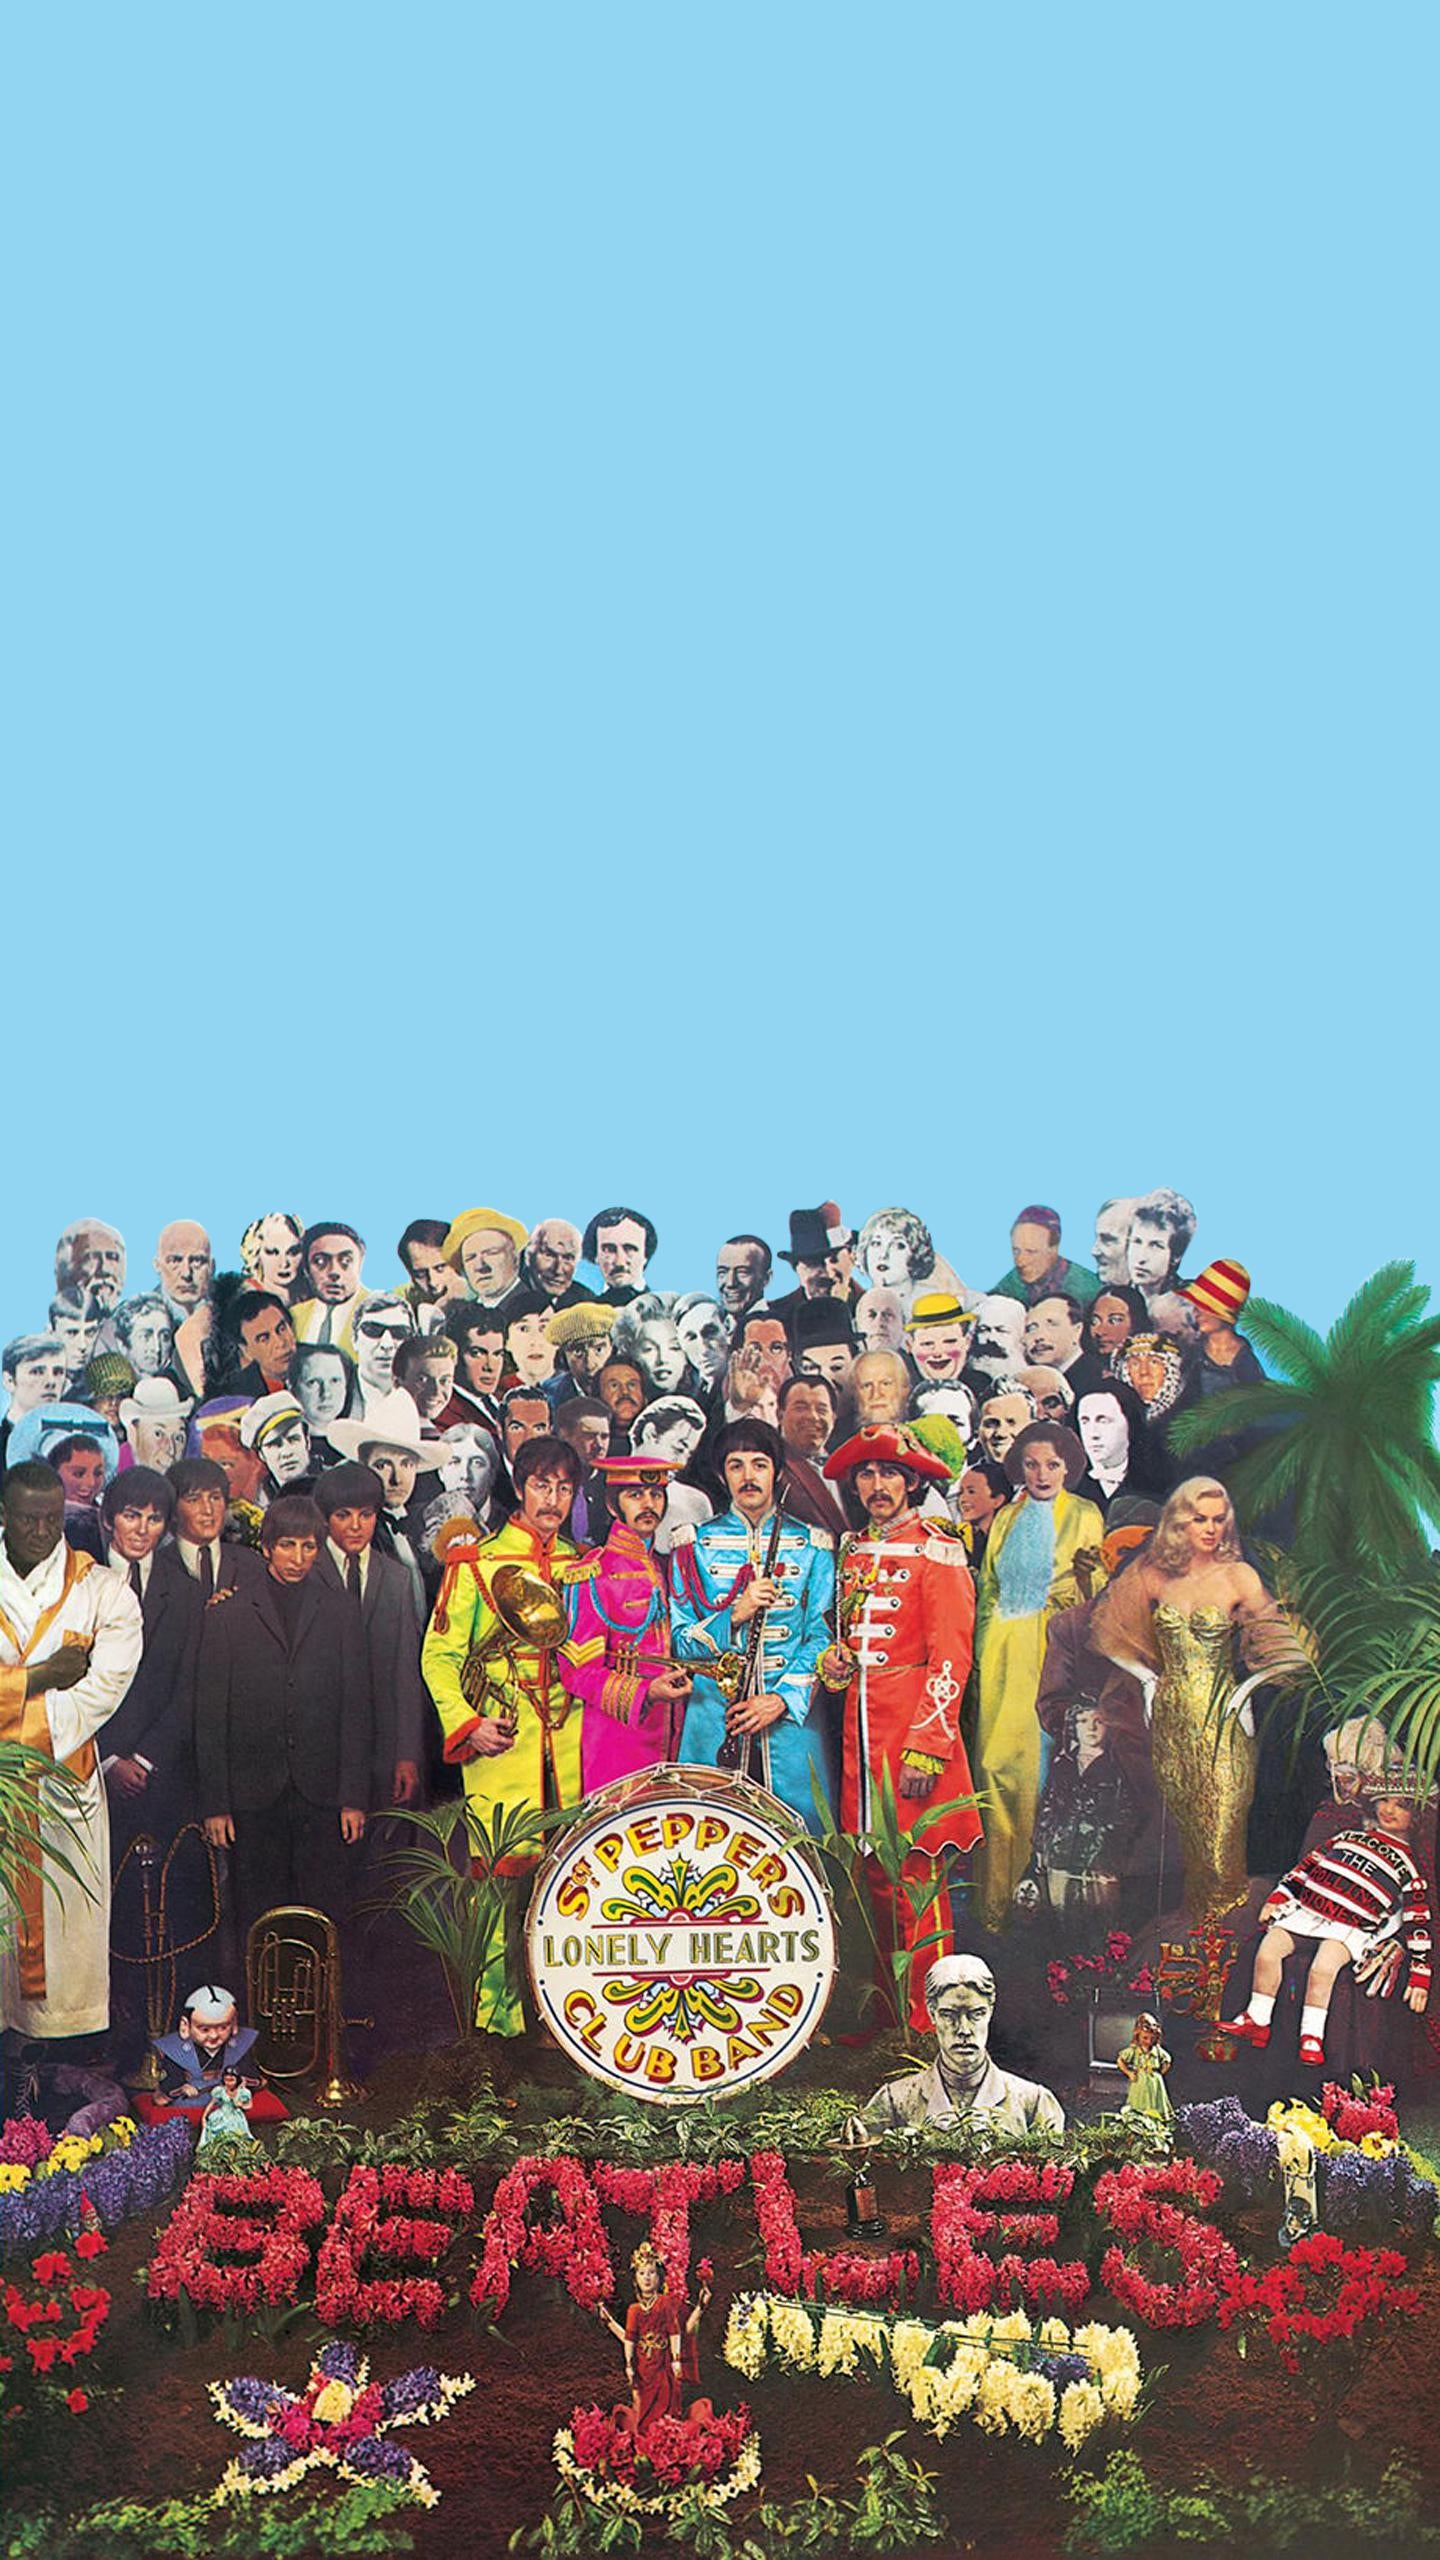 I Turned The Sgt Peppers Lonely Hearts Club Band Album Cover Into